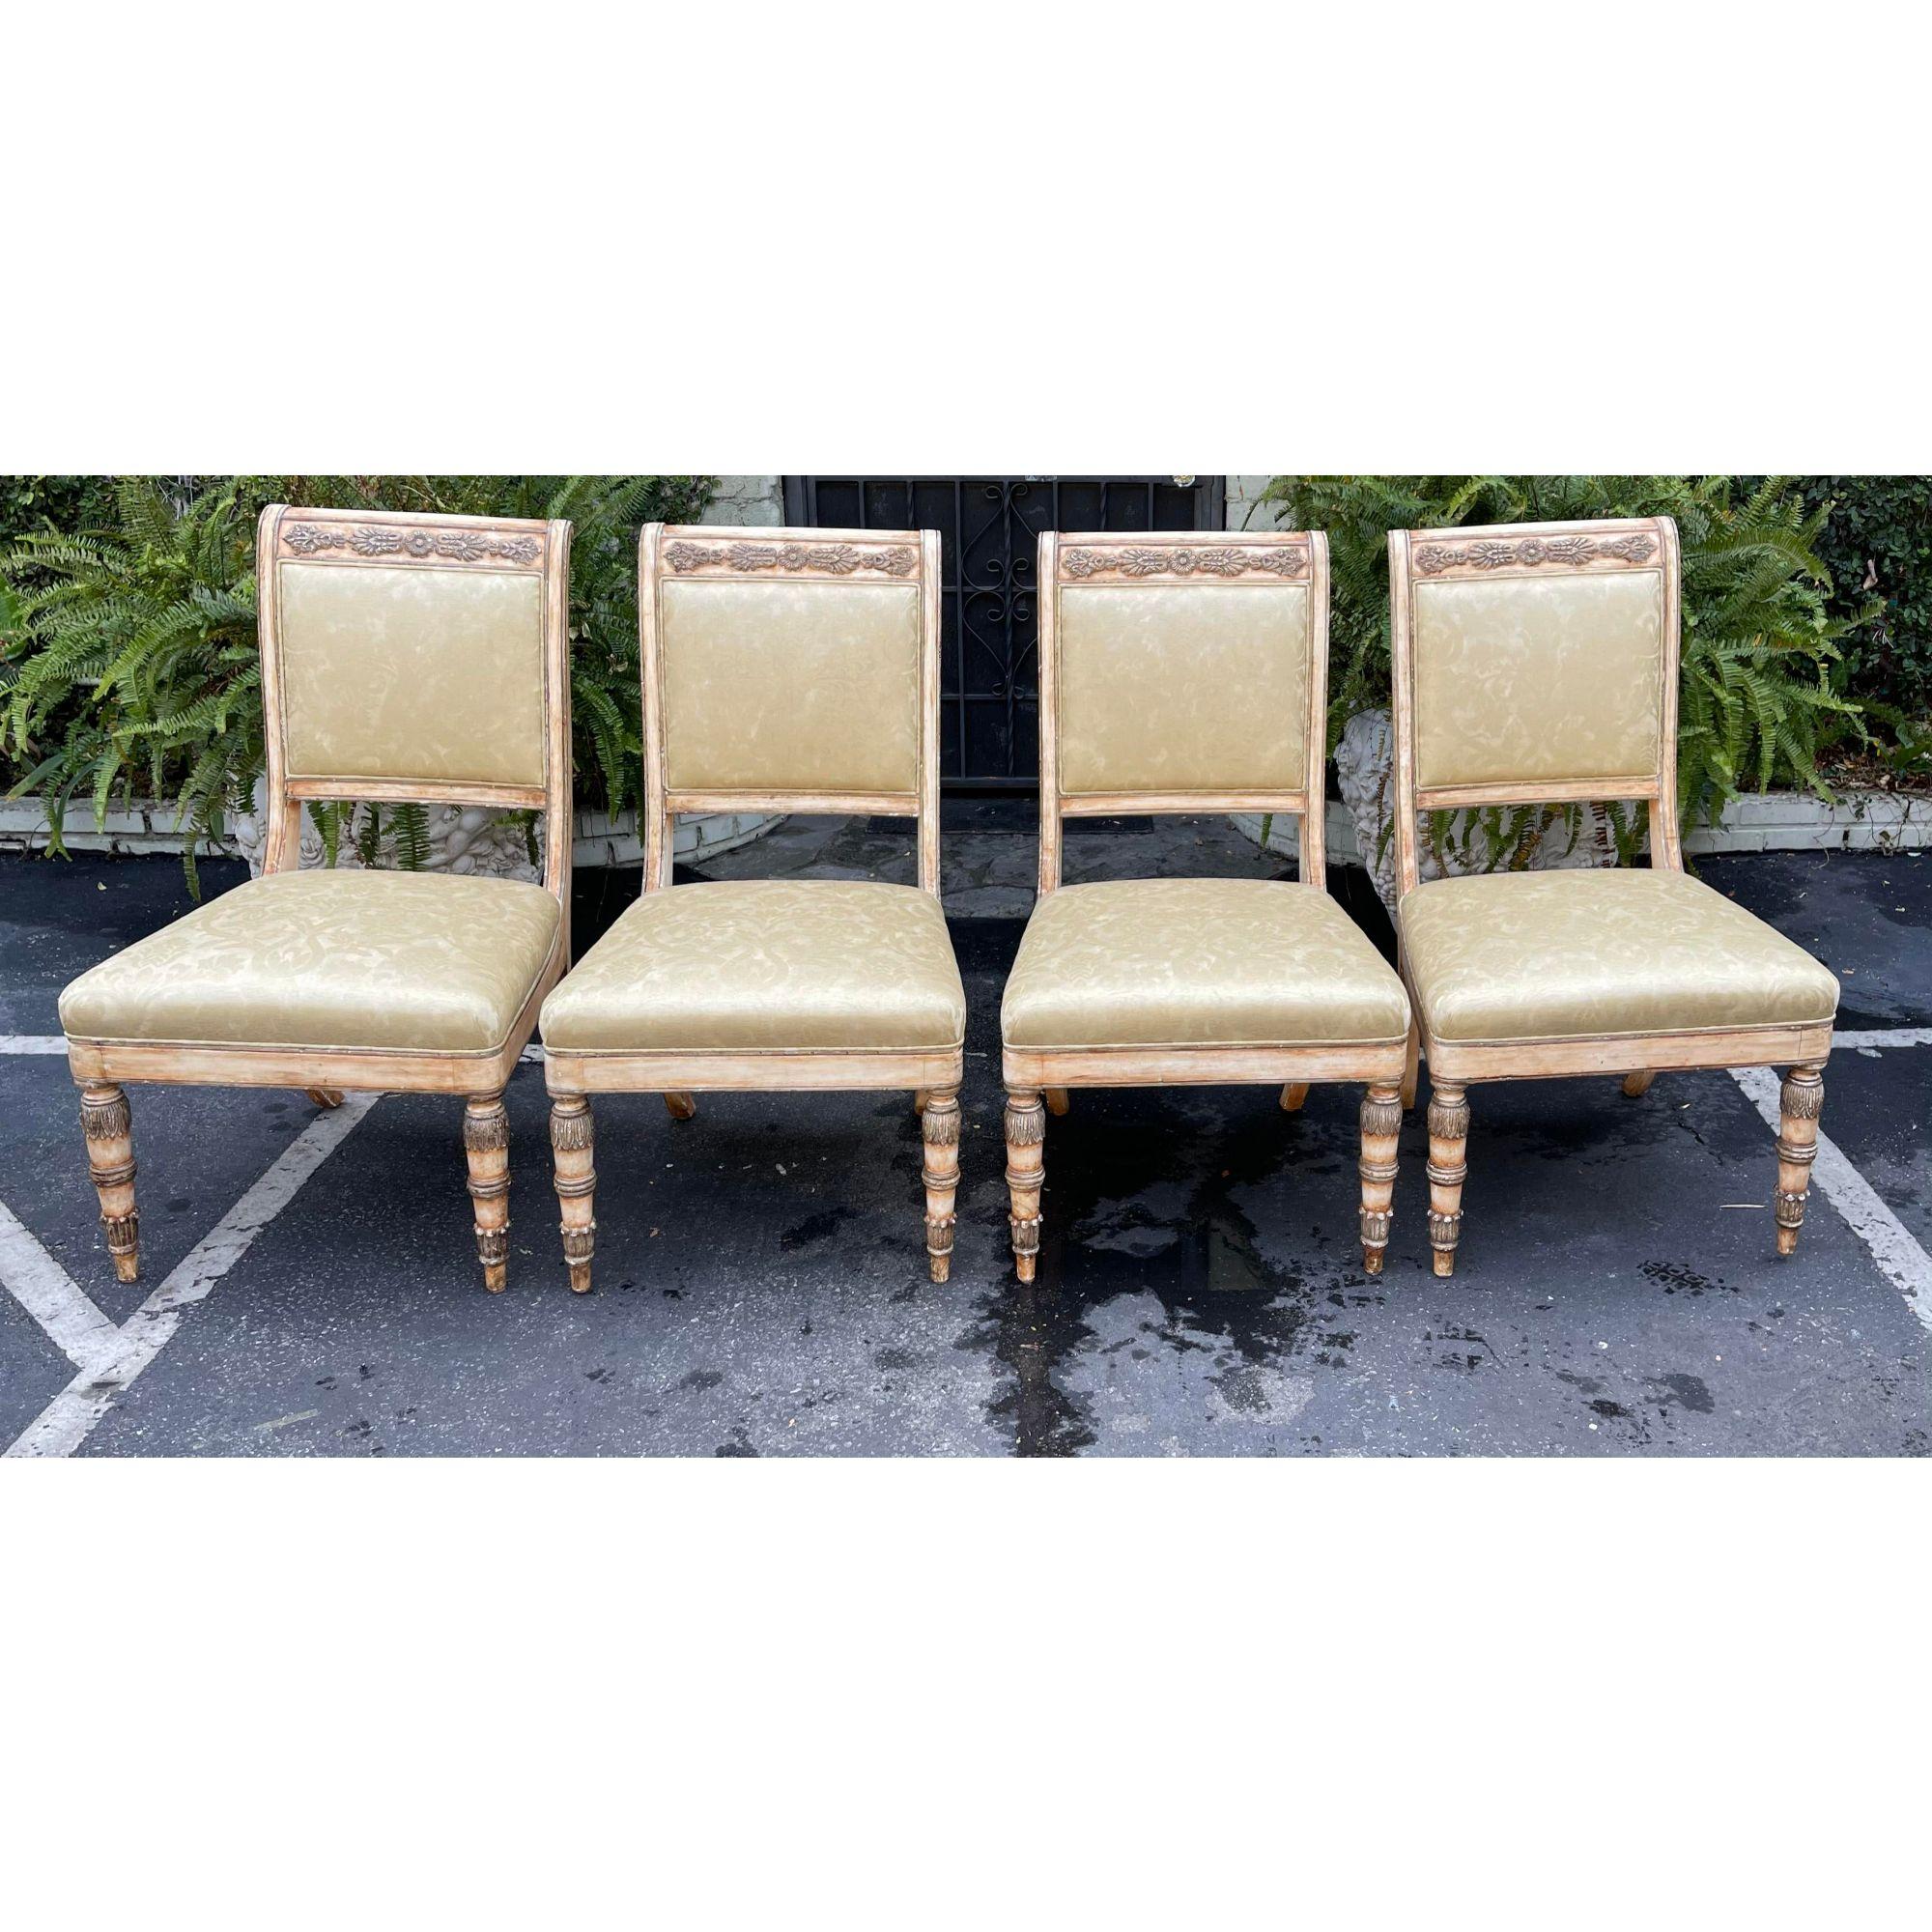 19th Century style Charles Pollock for William Switzer Russian Imperial dining chairs W Fortuny seats - set of 4.

Additional information: 
Materials: cotton, wood.
Color: beige.
Brand: William Switzer.
Designer: Charles Pollock.
Period: